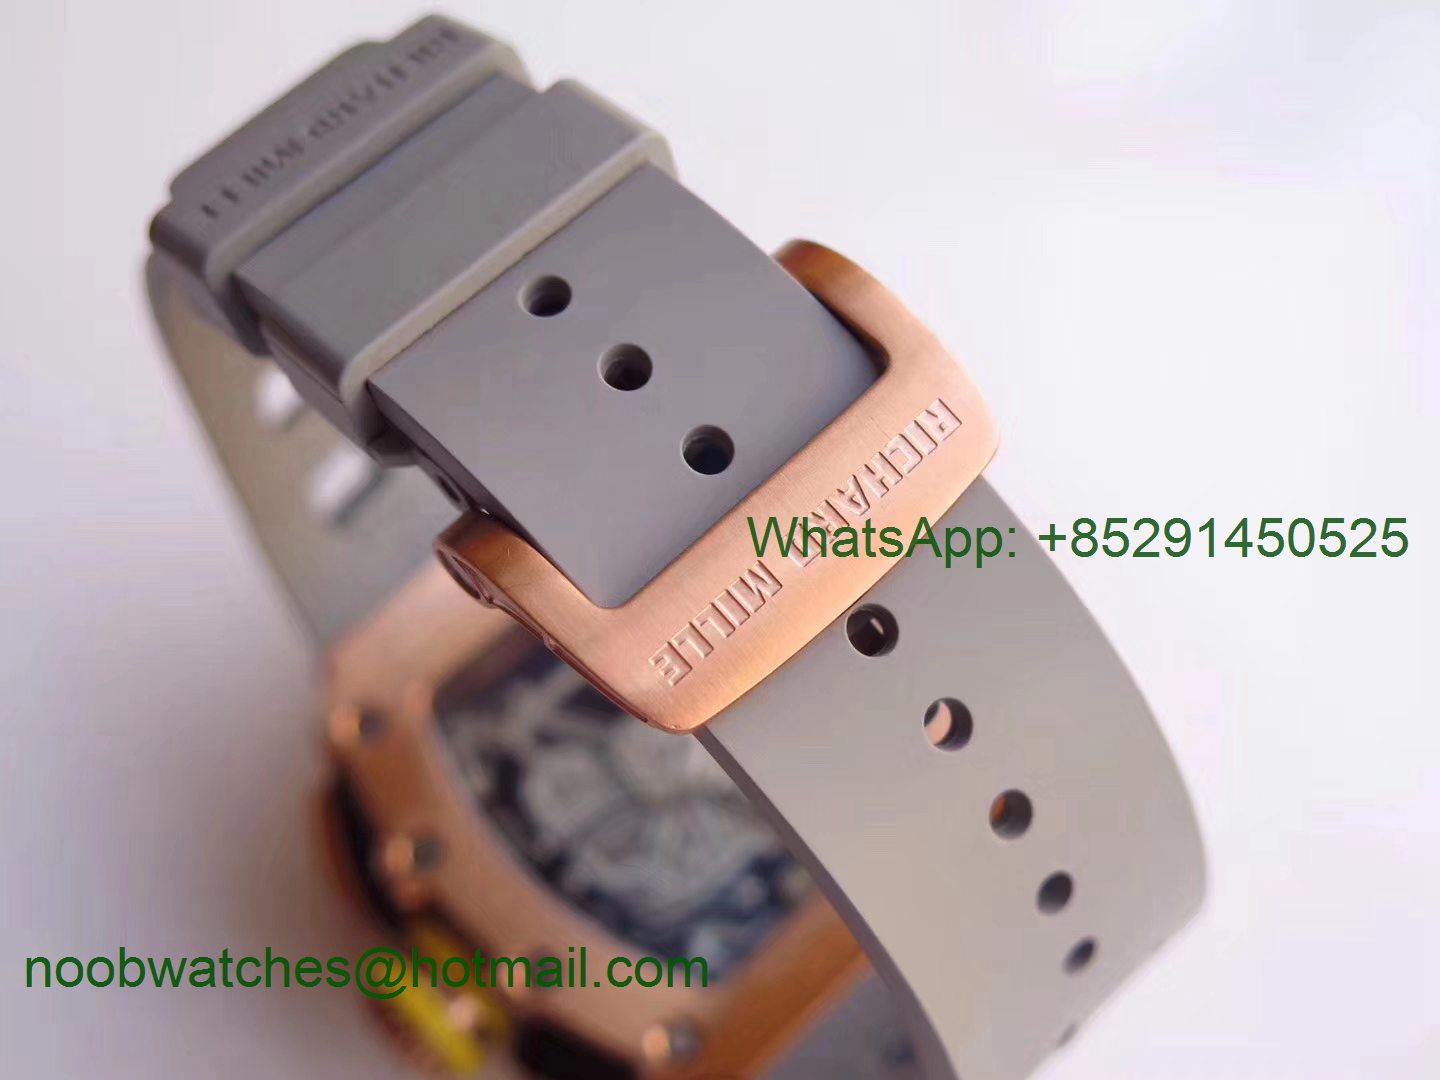 Replica Richard Mille RM011 Rose Gold Chronograph KVF 1:1 Best Edition Crystal Skeleton Dial on Gray Rubber Strap A7750